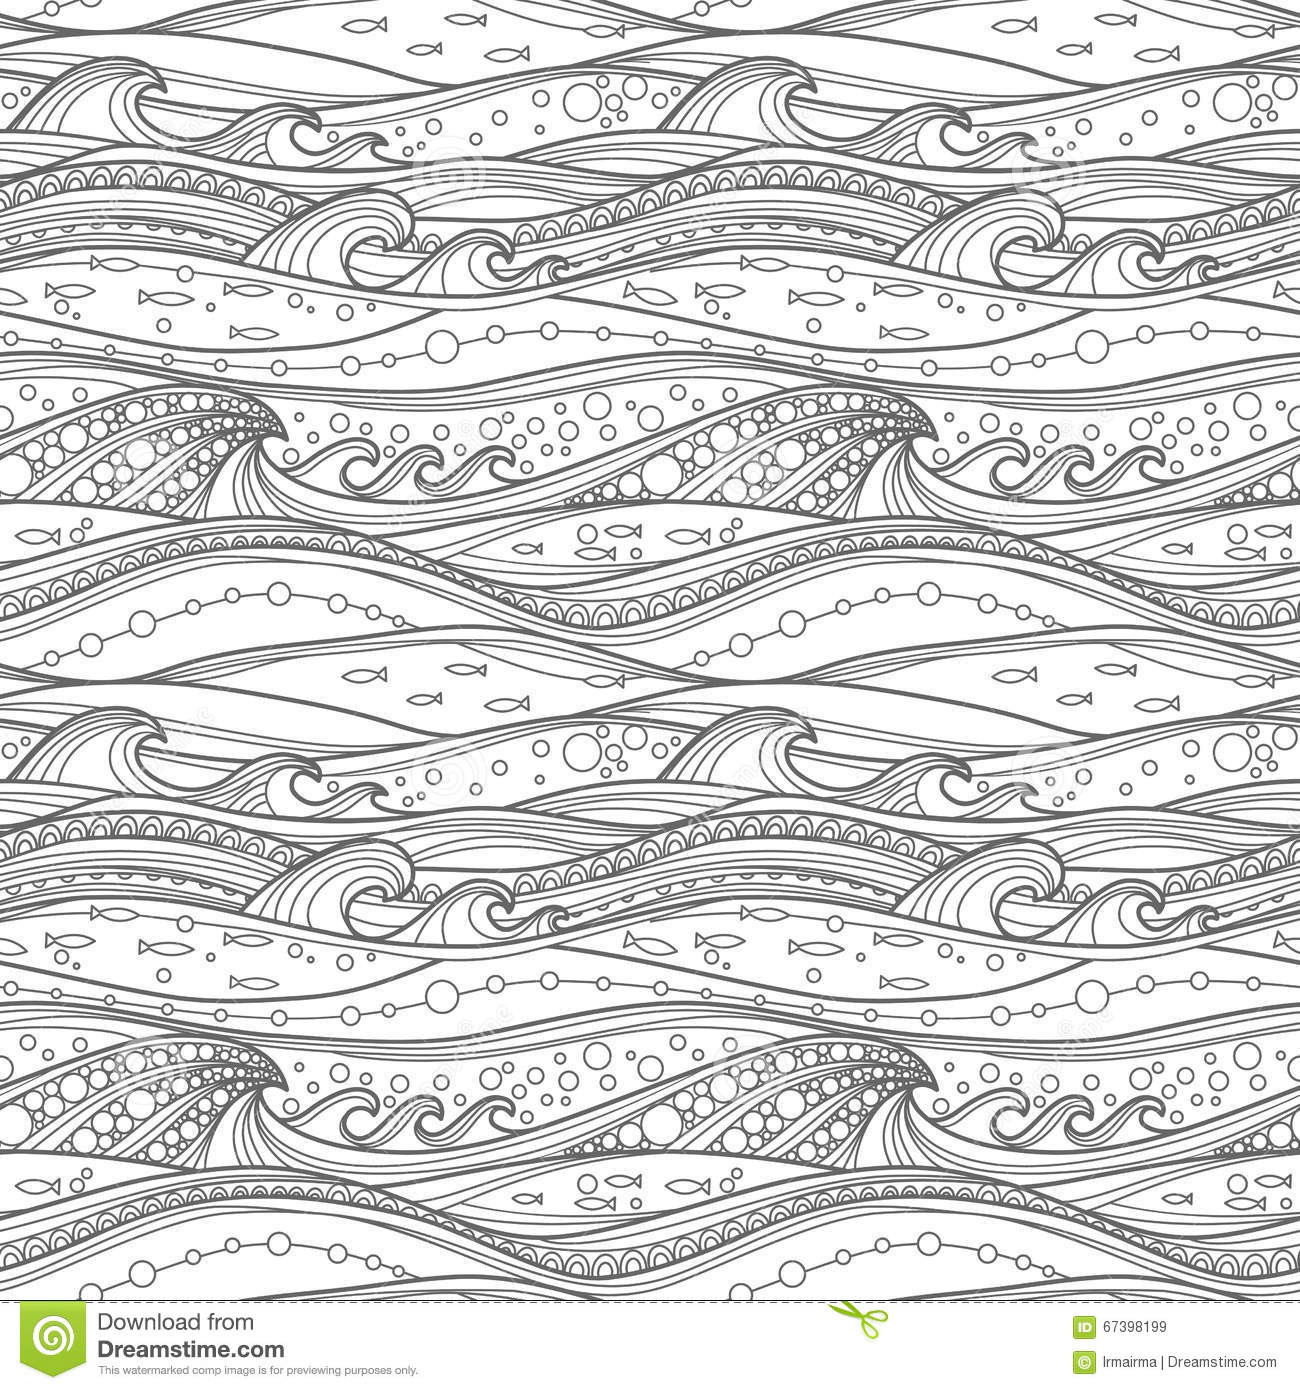 Ocean Waves Coloring Pages For Adults
 Coloring page sea pattern stock vector Illustration of